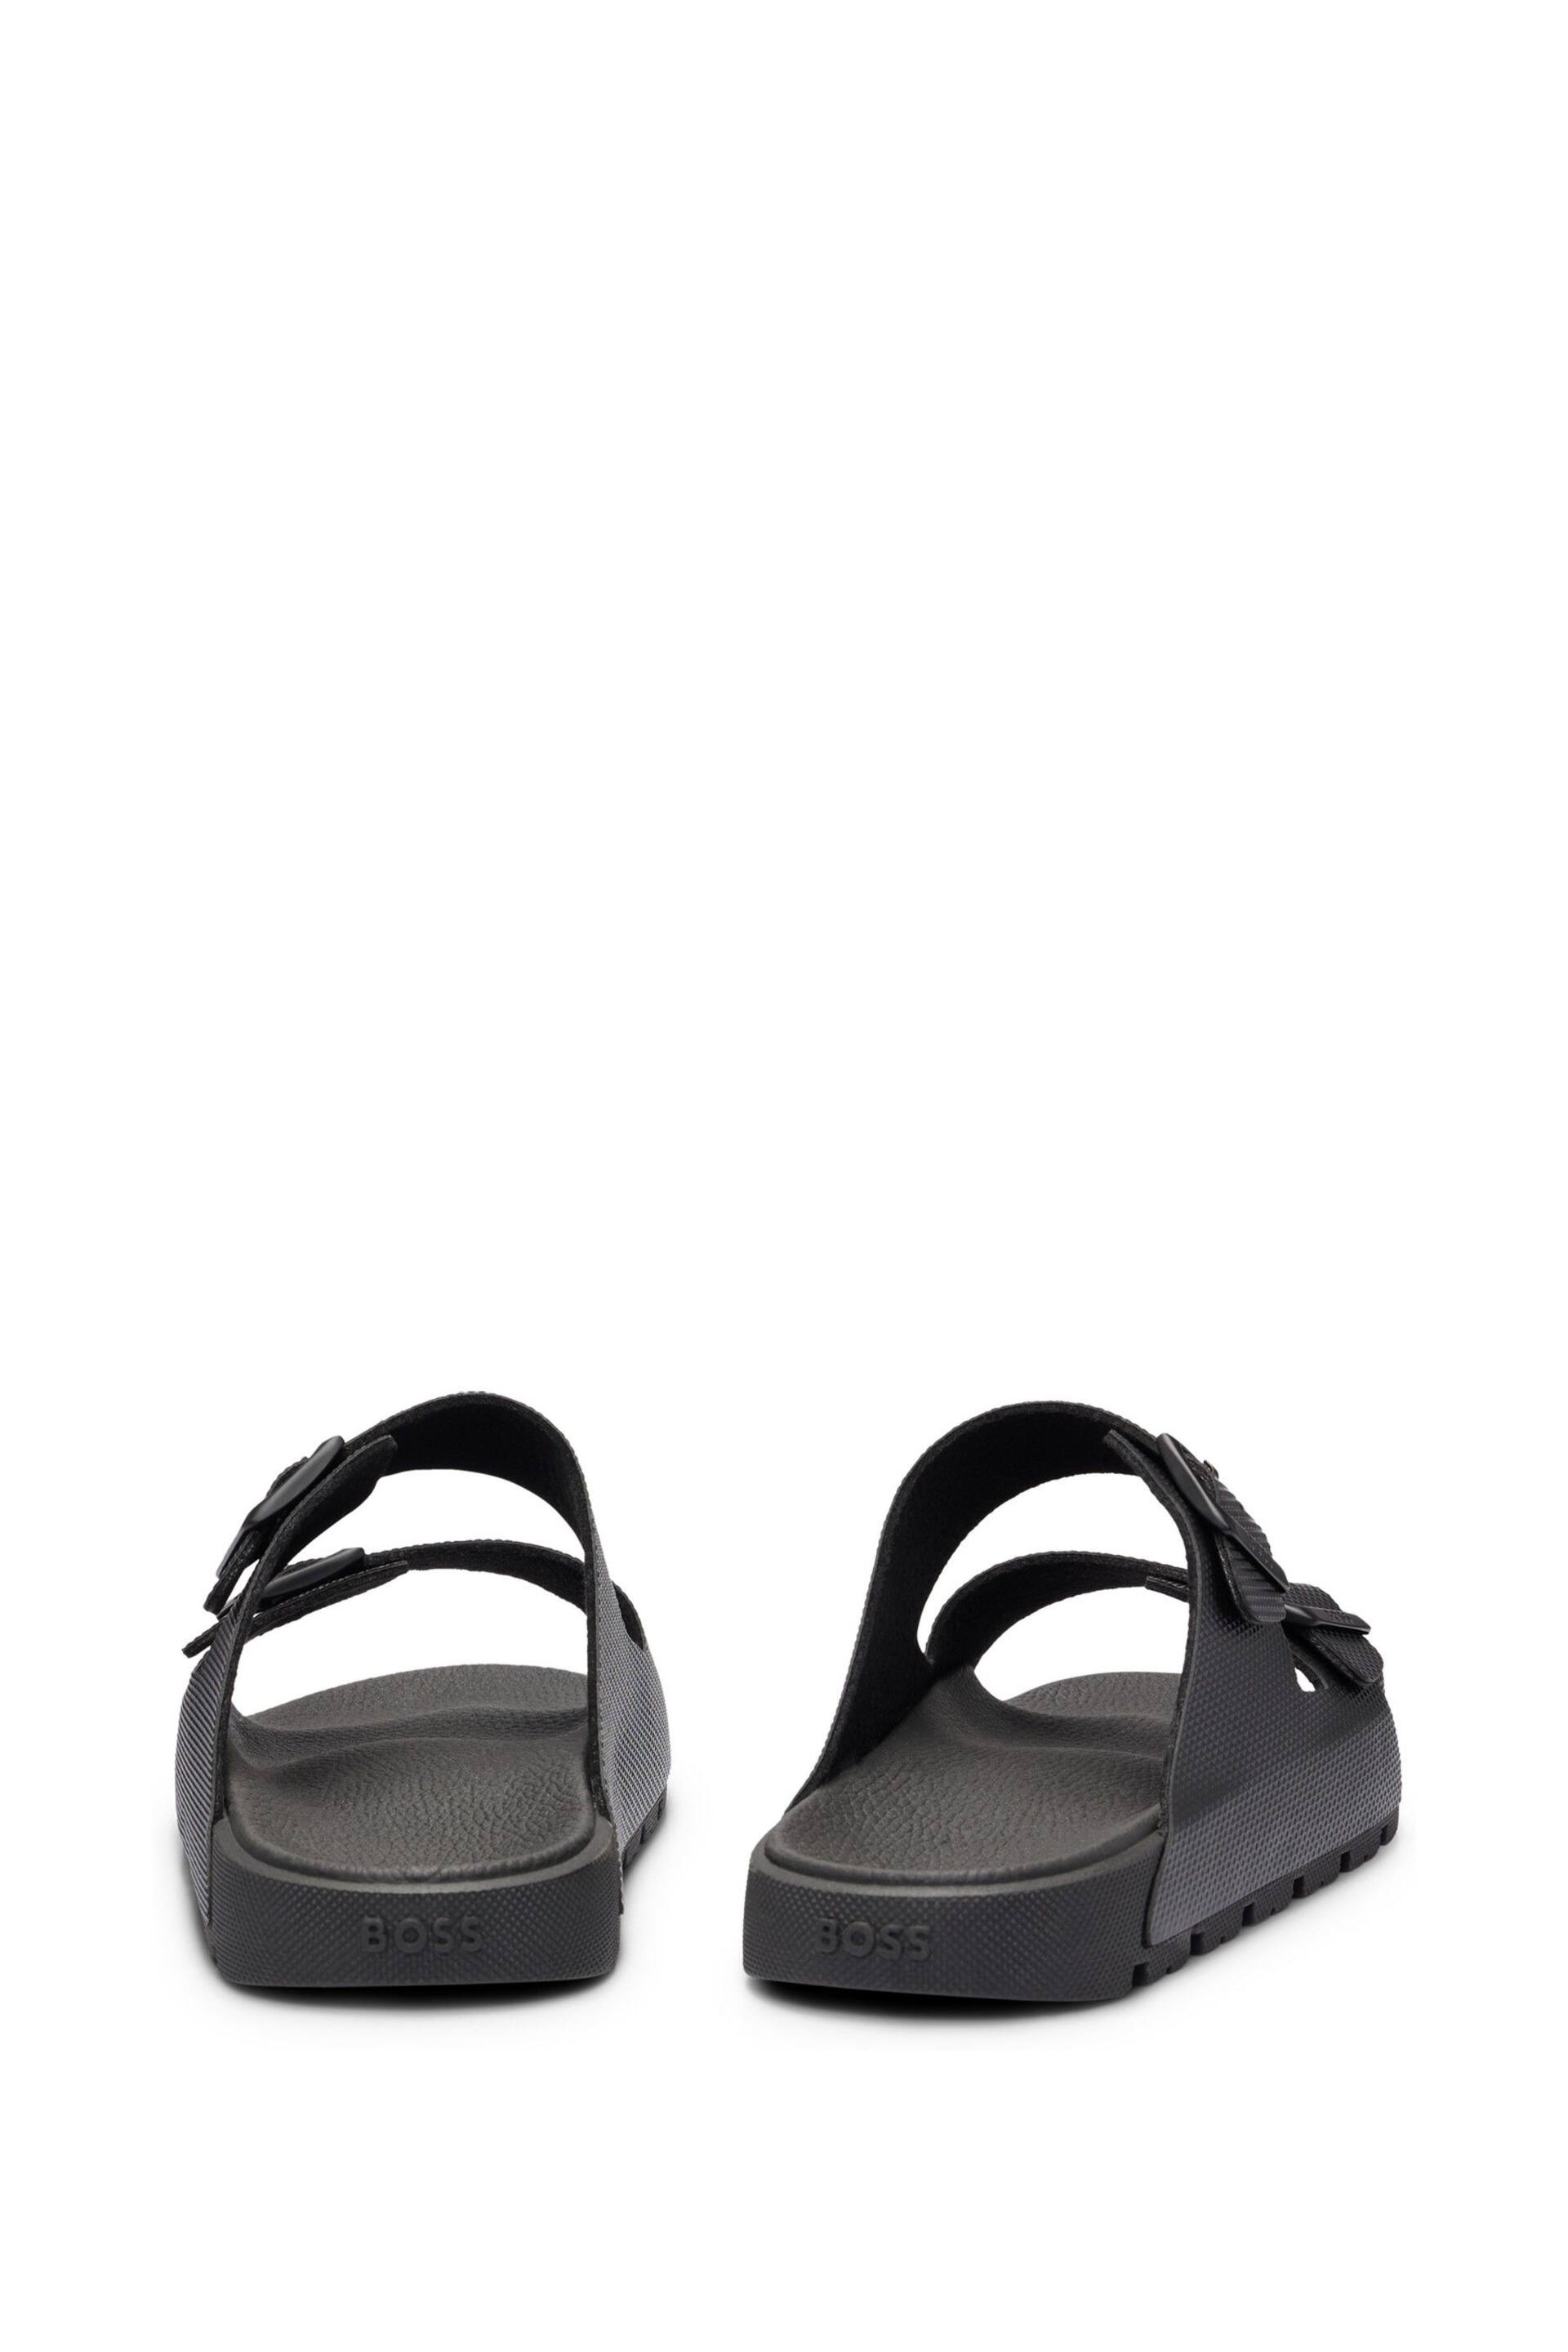 BOSS Black All-Gender Twin-Strap Sandals With Structured Uppers - Image 4 of 5